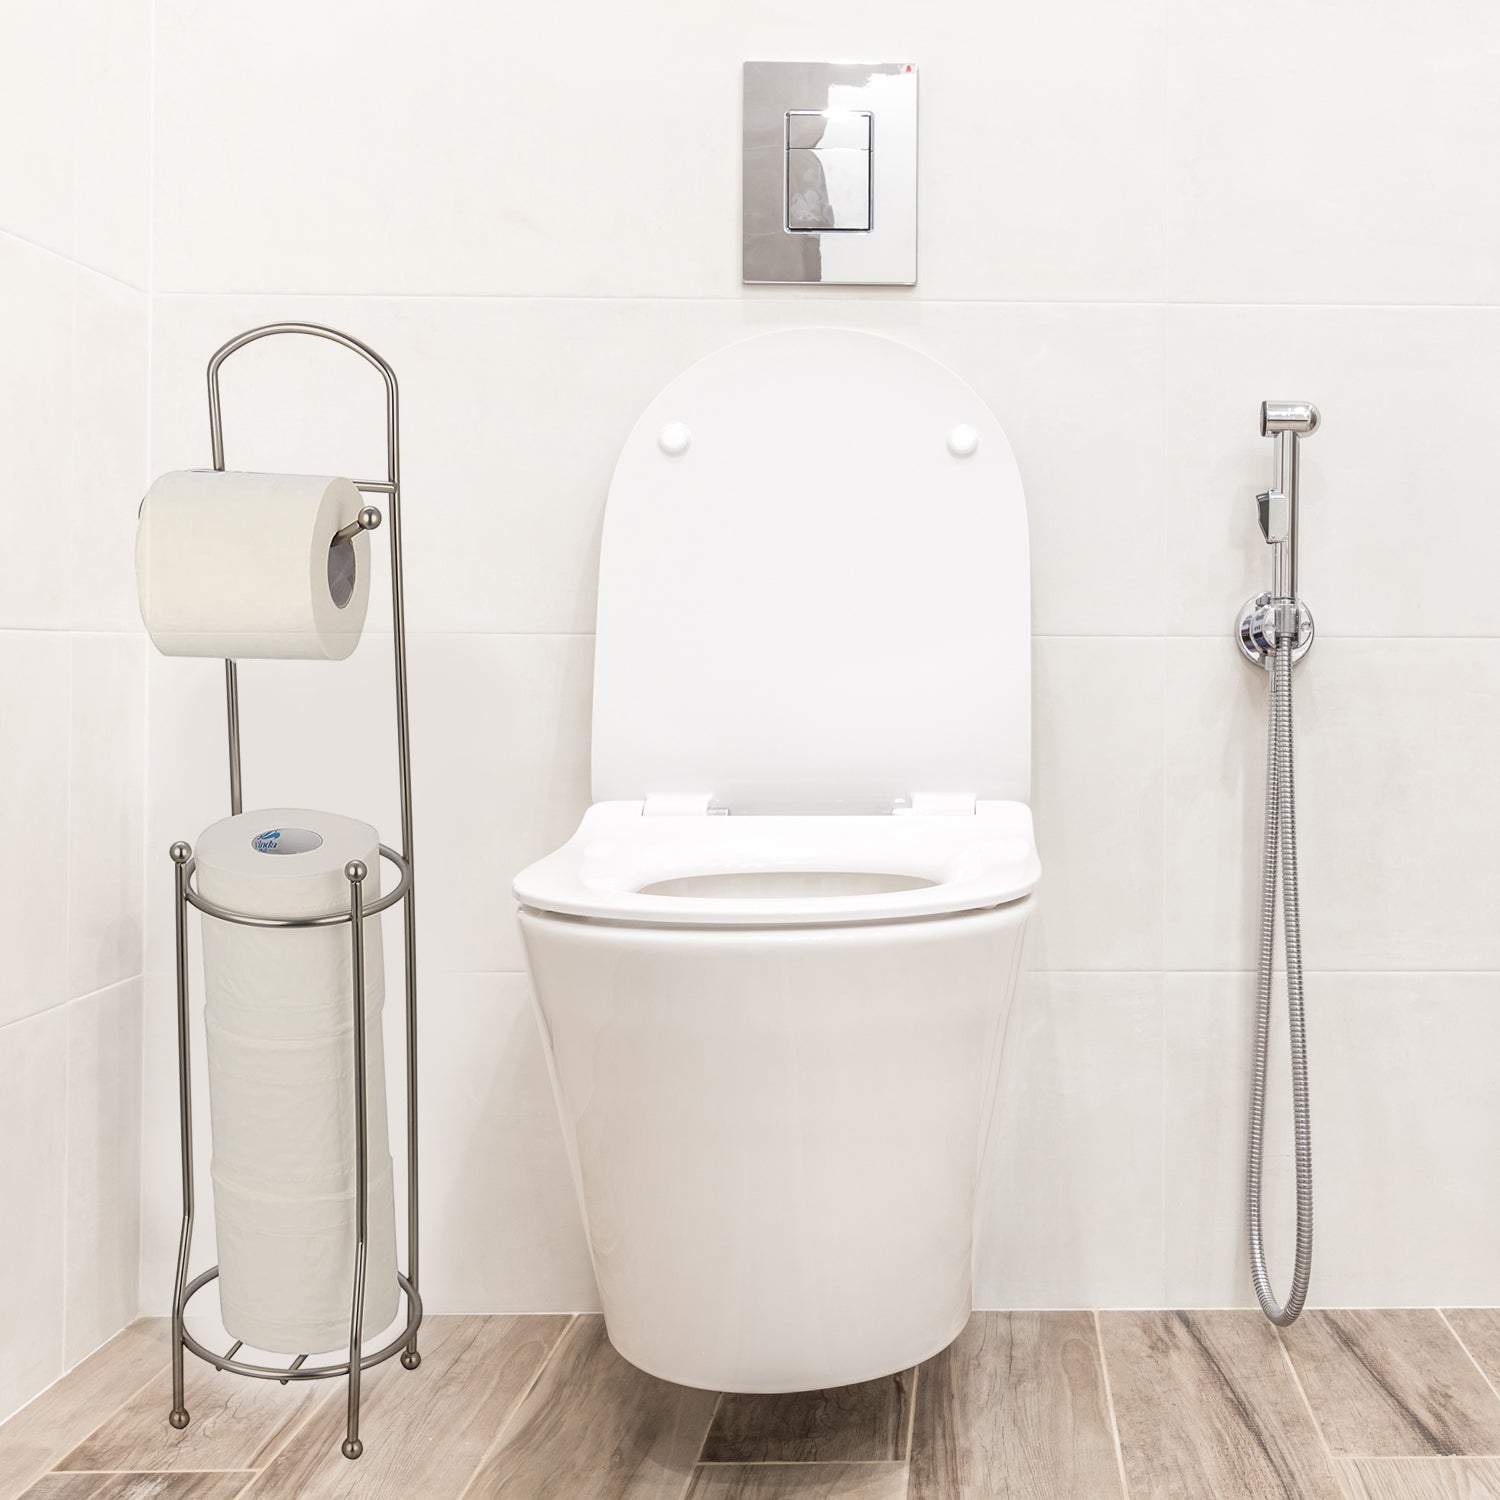 5199 Tissue Roll Stand 63cm High Quality Steel Stand Foe Toilet & Home Use Stand